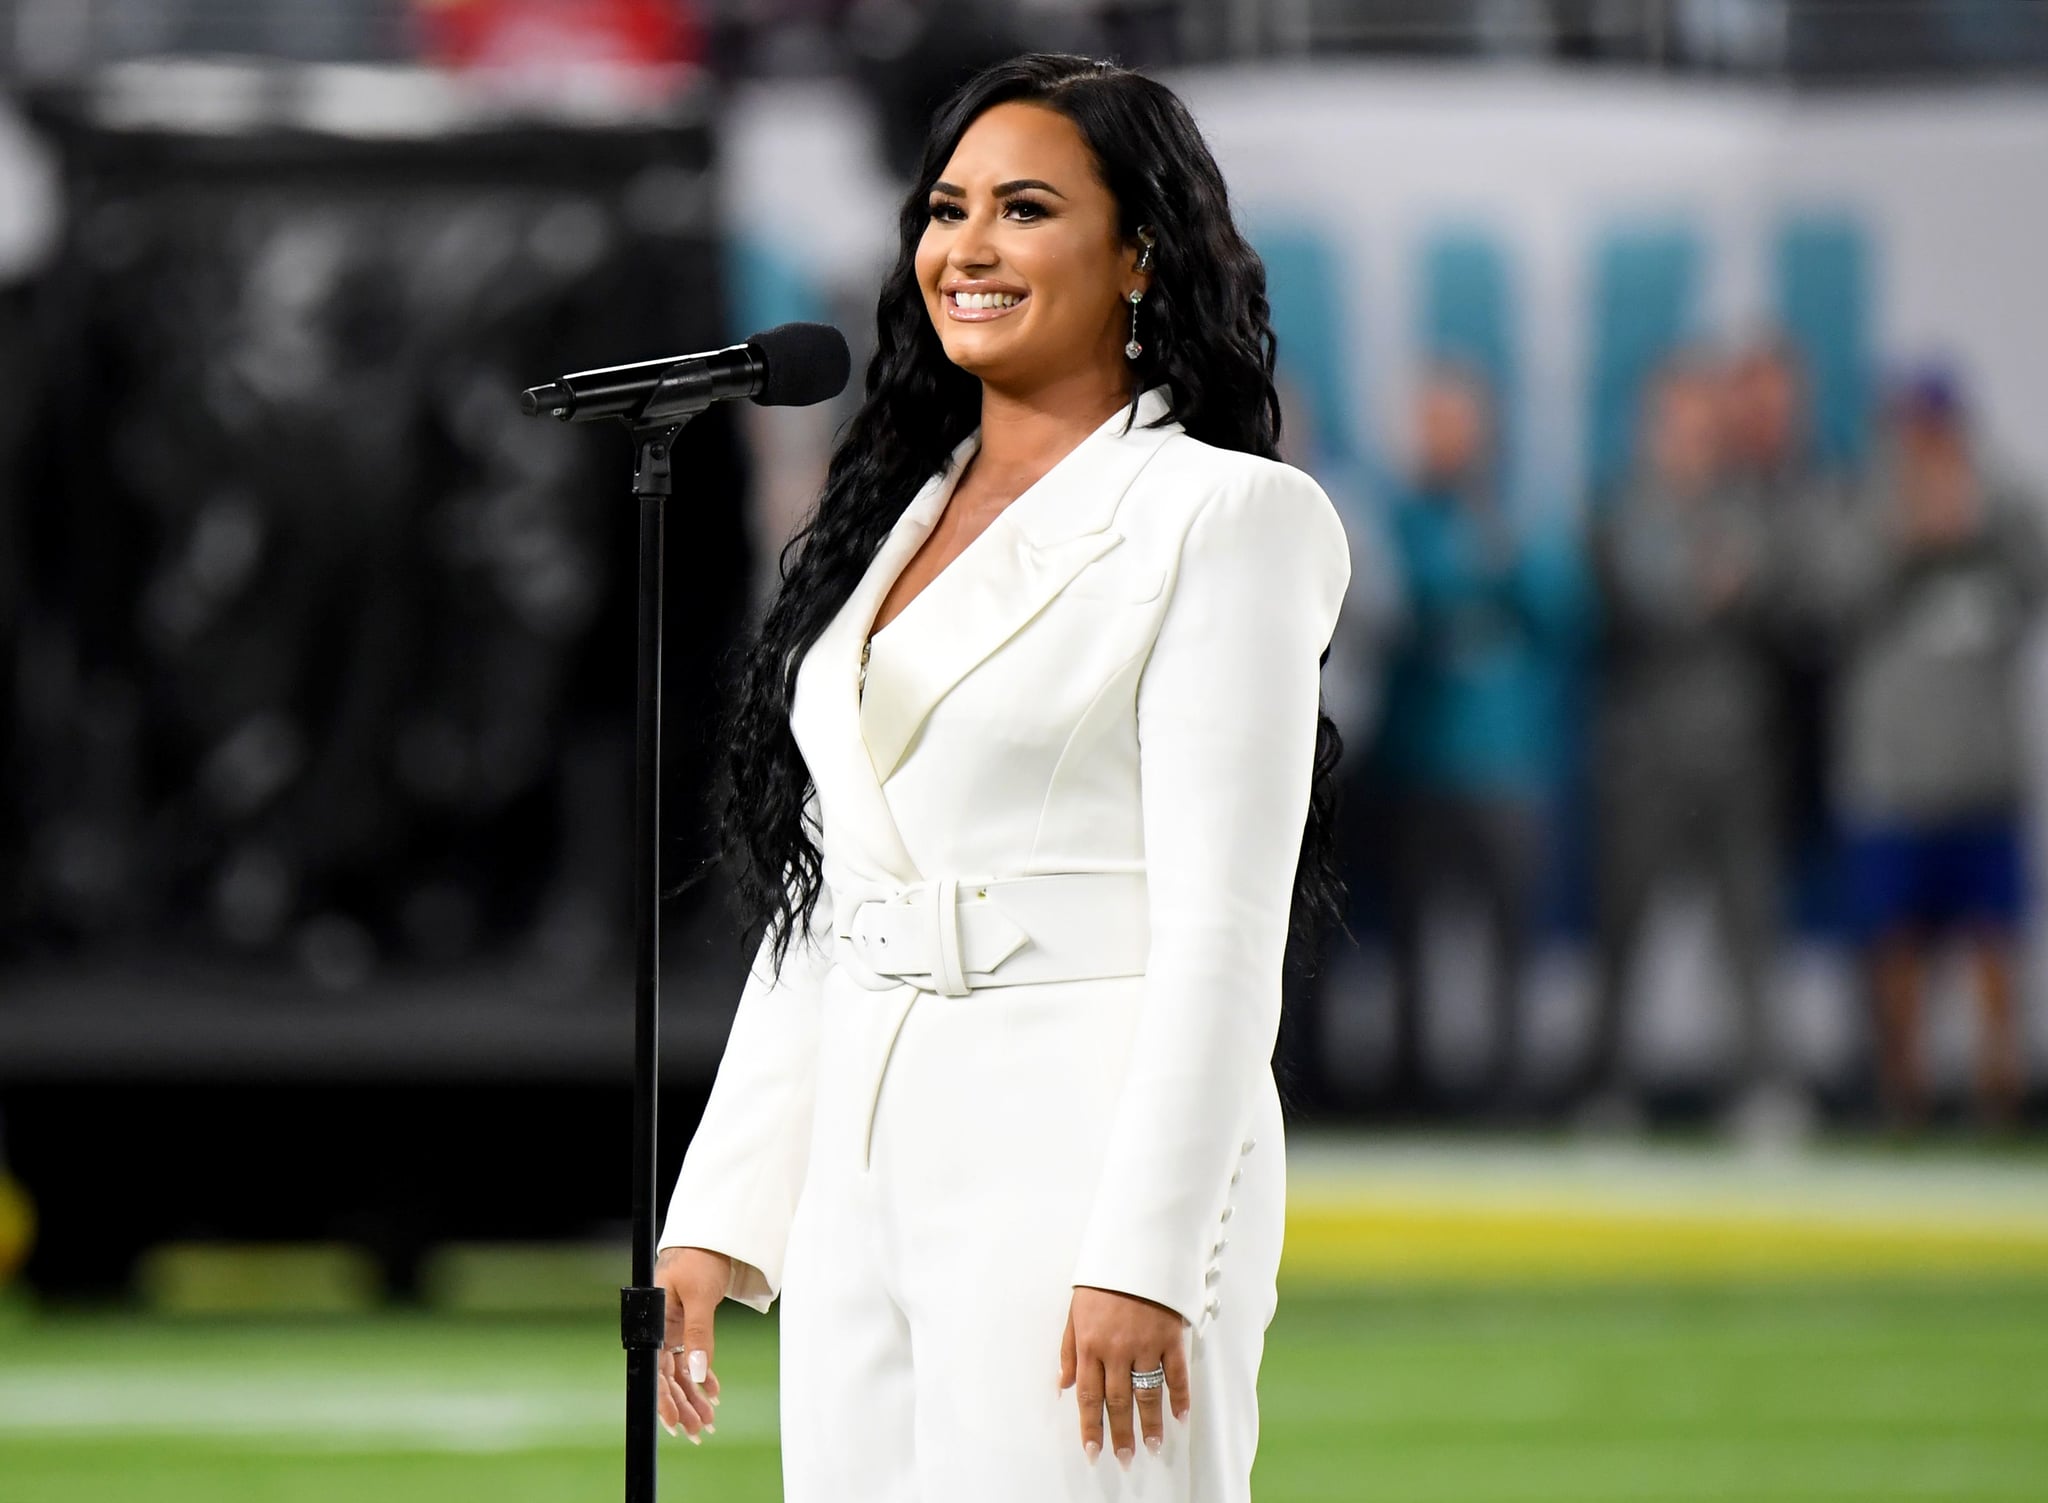 MIAMI GARDENS, FLORIDA - FEBRUARY 02: Demi Lovato performs the National Anthem onstage during Super Bowl LIV at Hard Rock Stadium on February 02, 2020 in Miami Gardens, Florida. (Photo by Jeff Kravitz/FilmMagic)